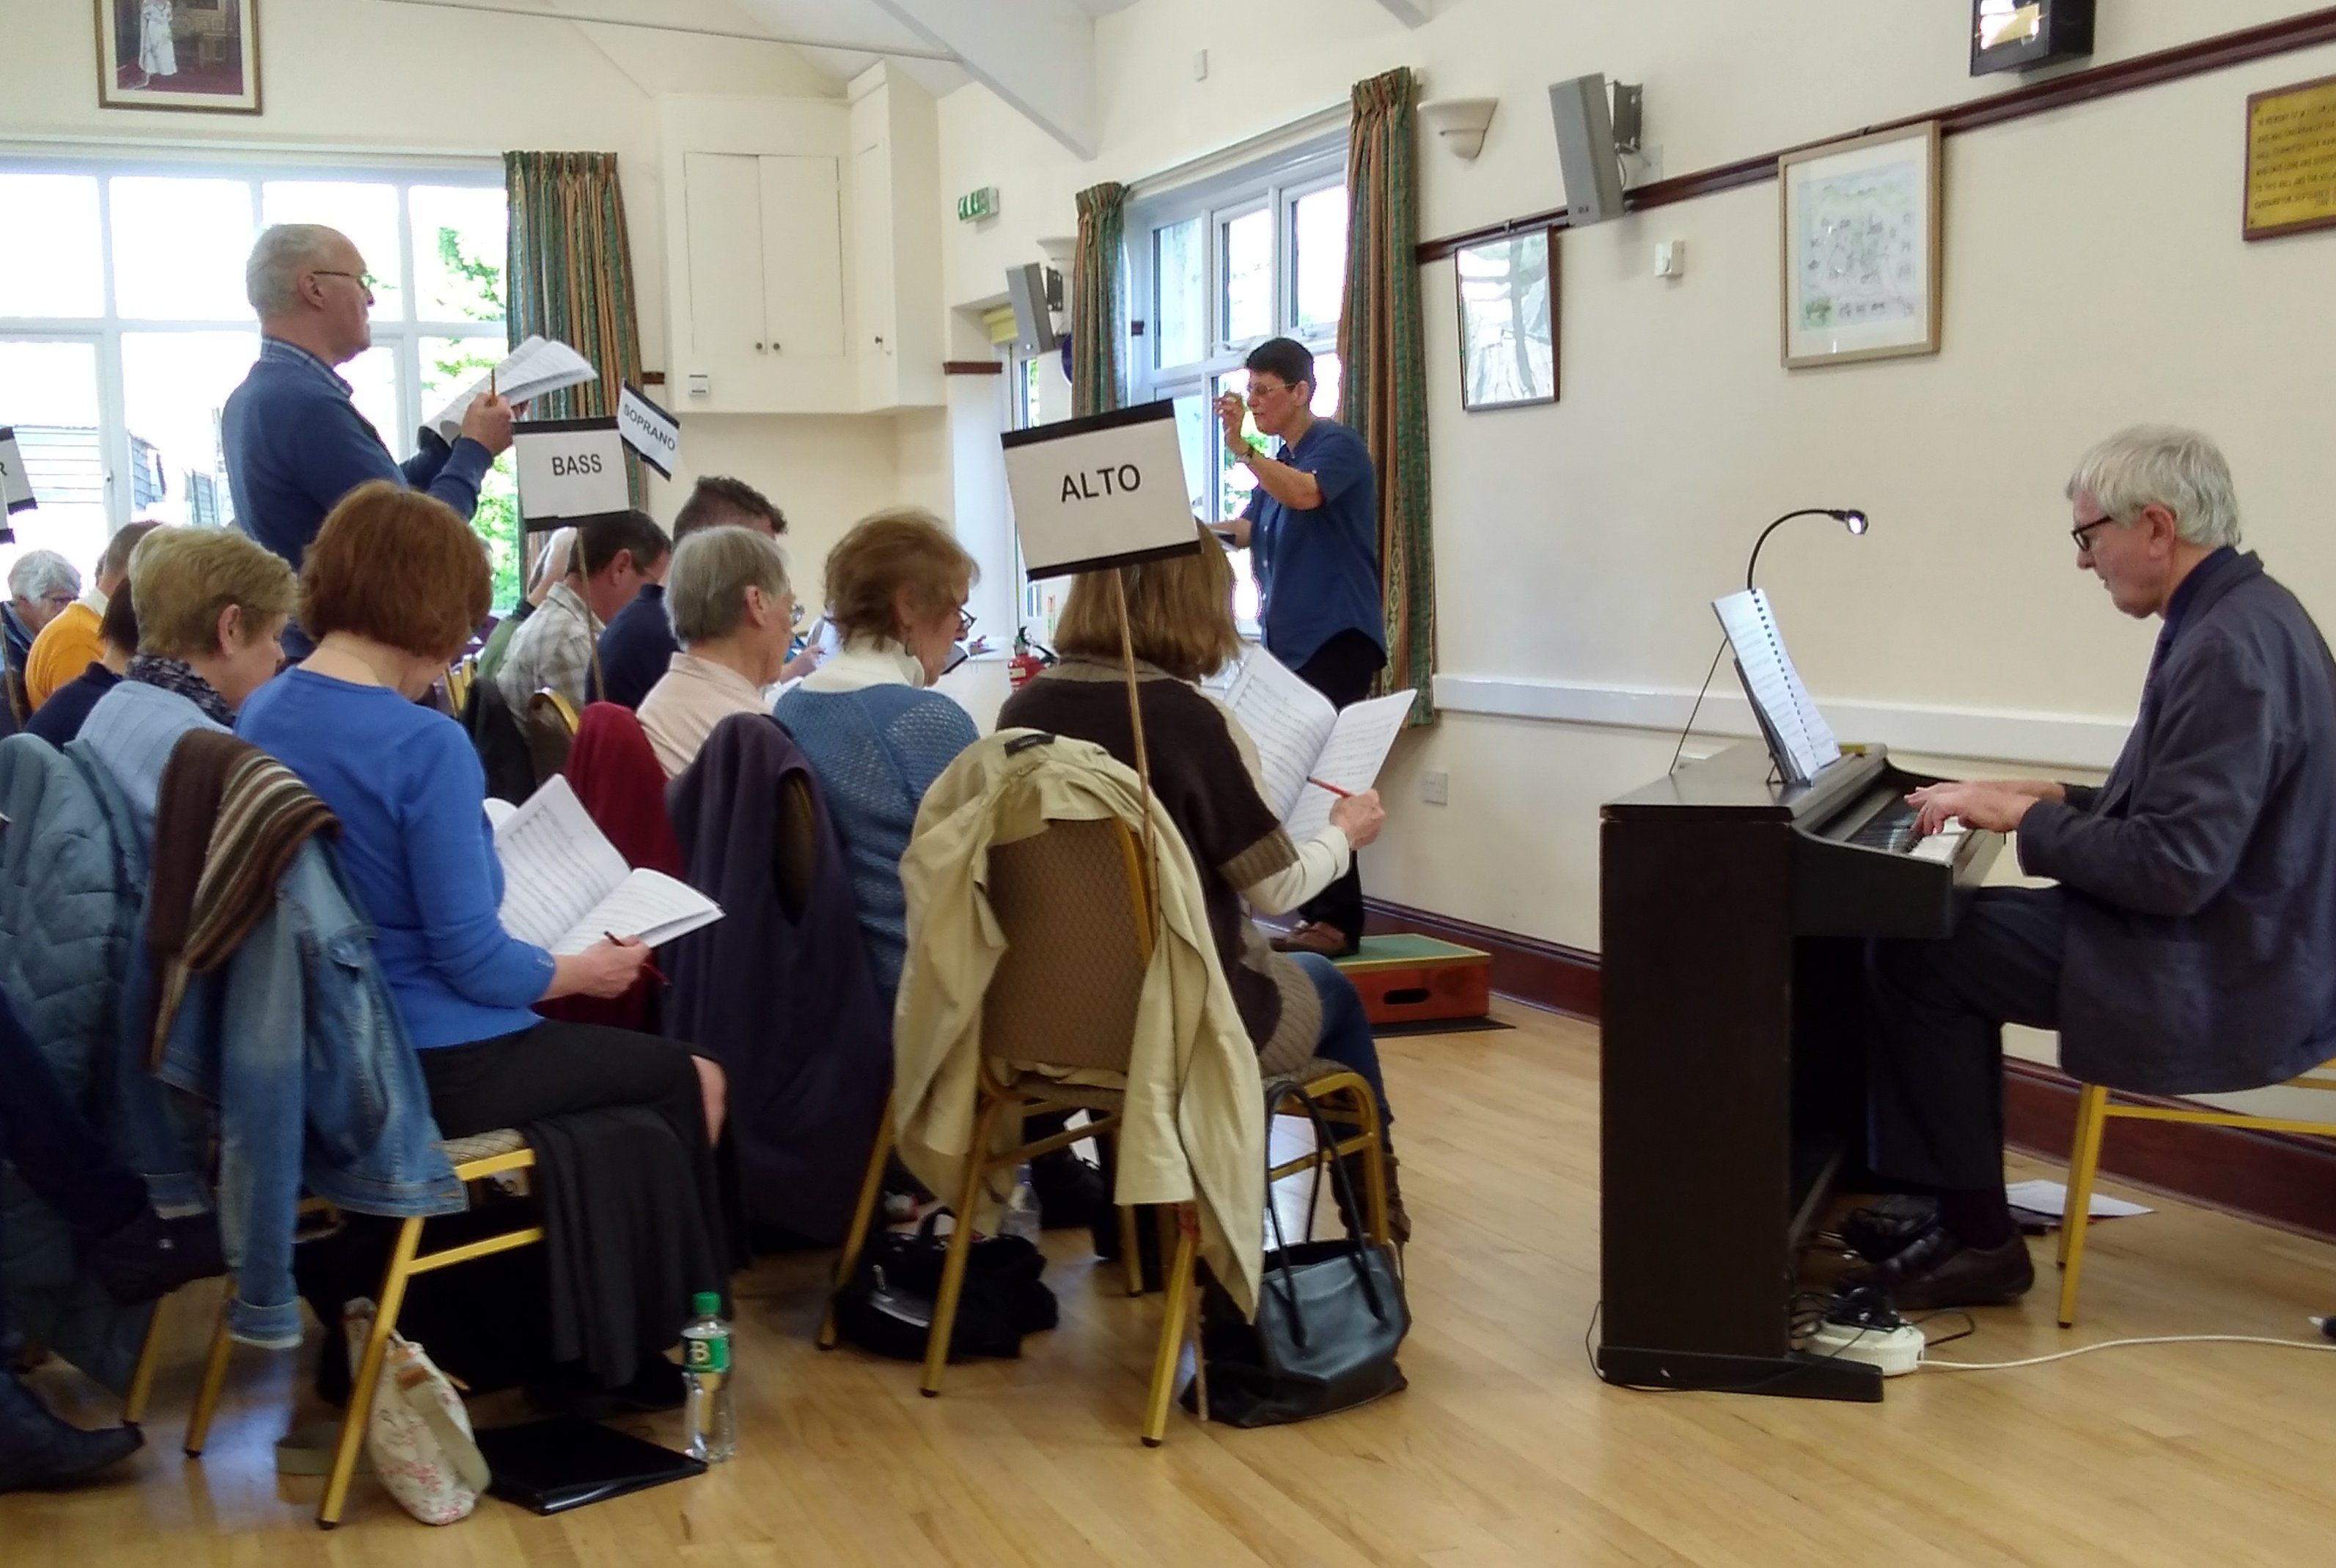 Rehearsing 'Knock on the Door' at the April 2018 Workshop.